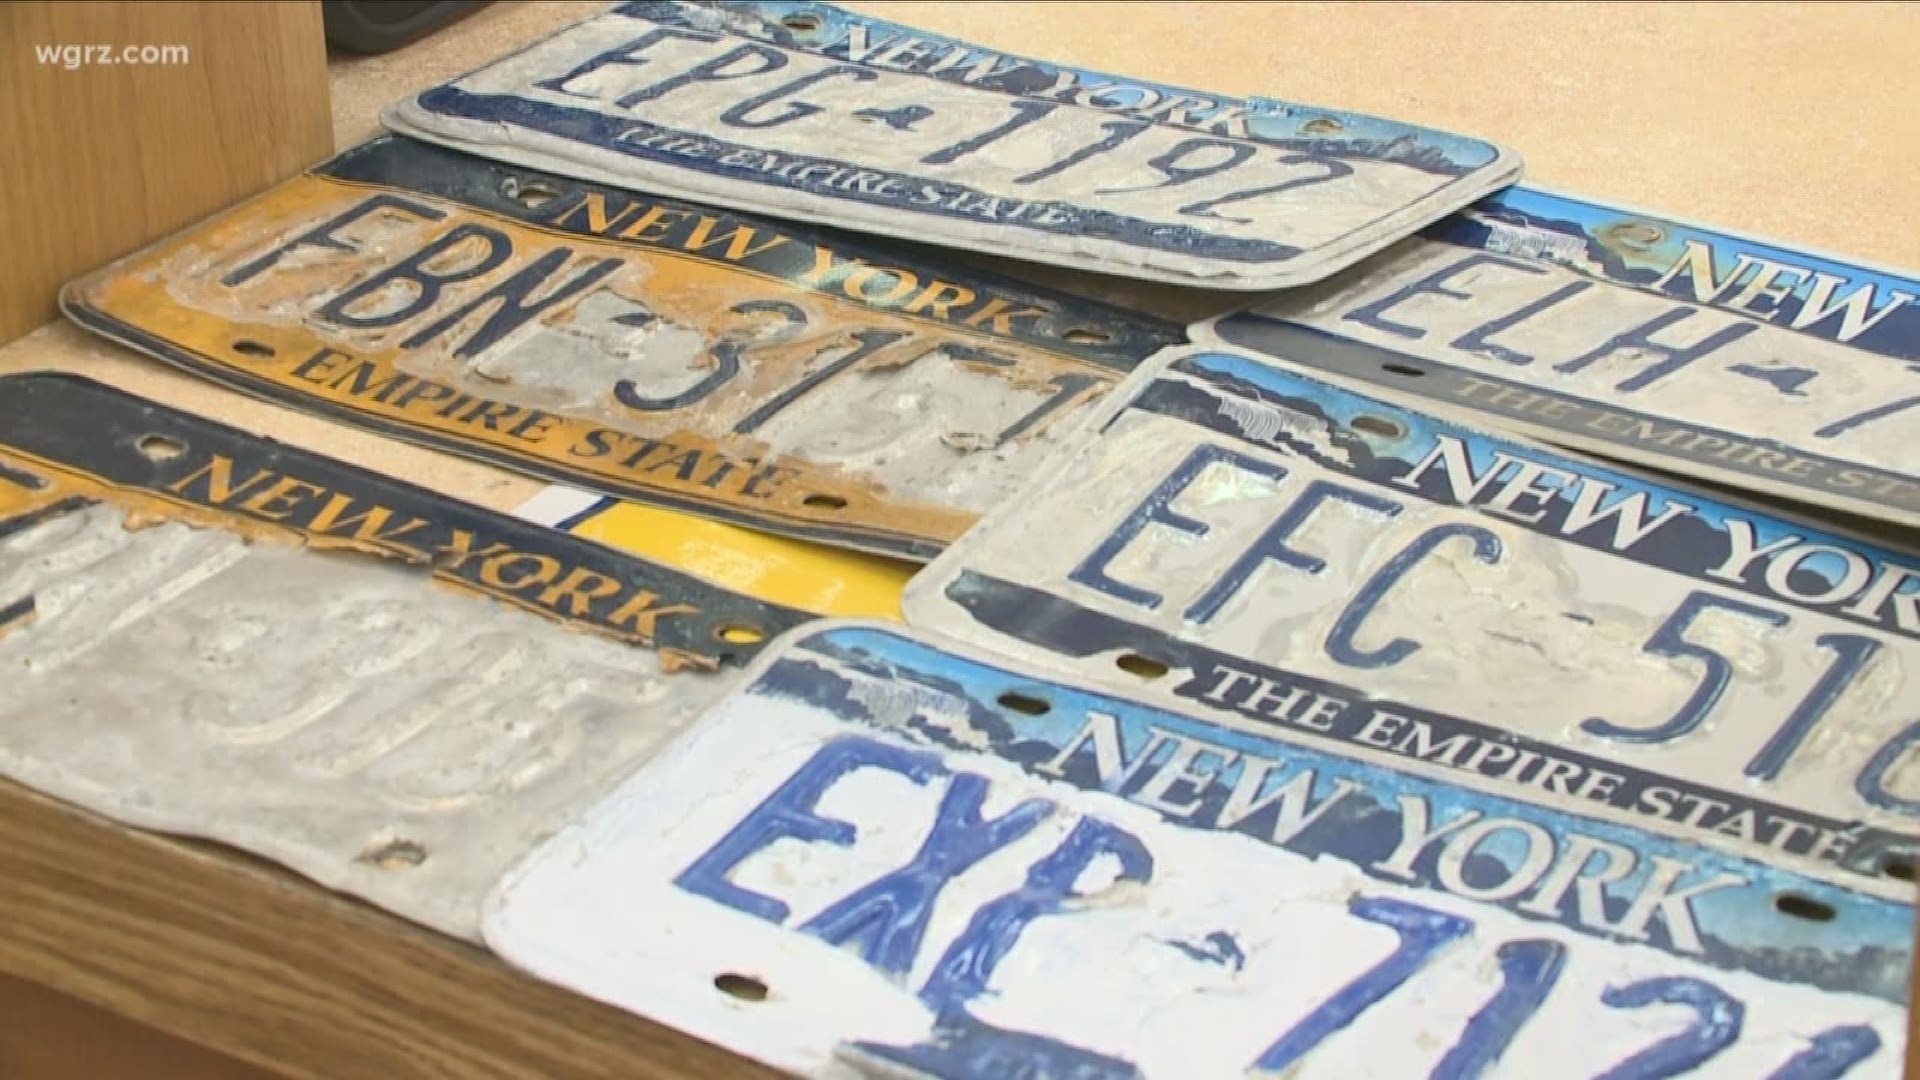 Find out what you should do when your New York States license plate starts peeling.